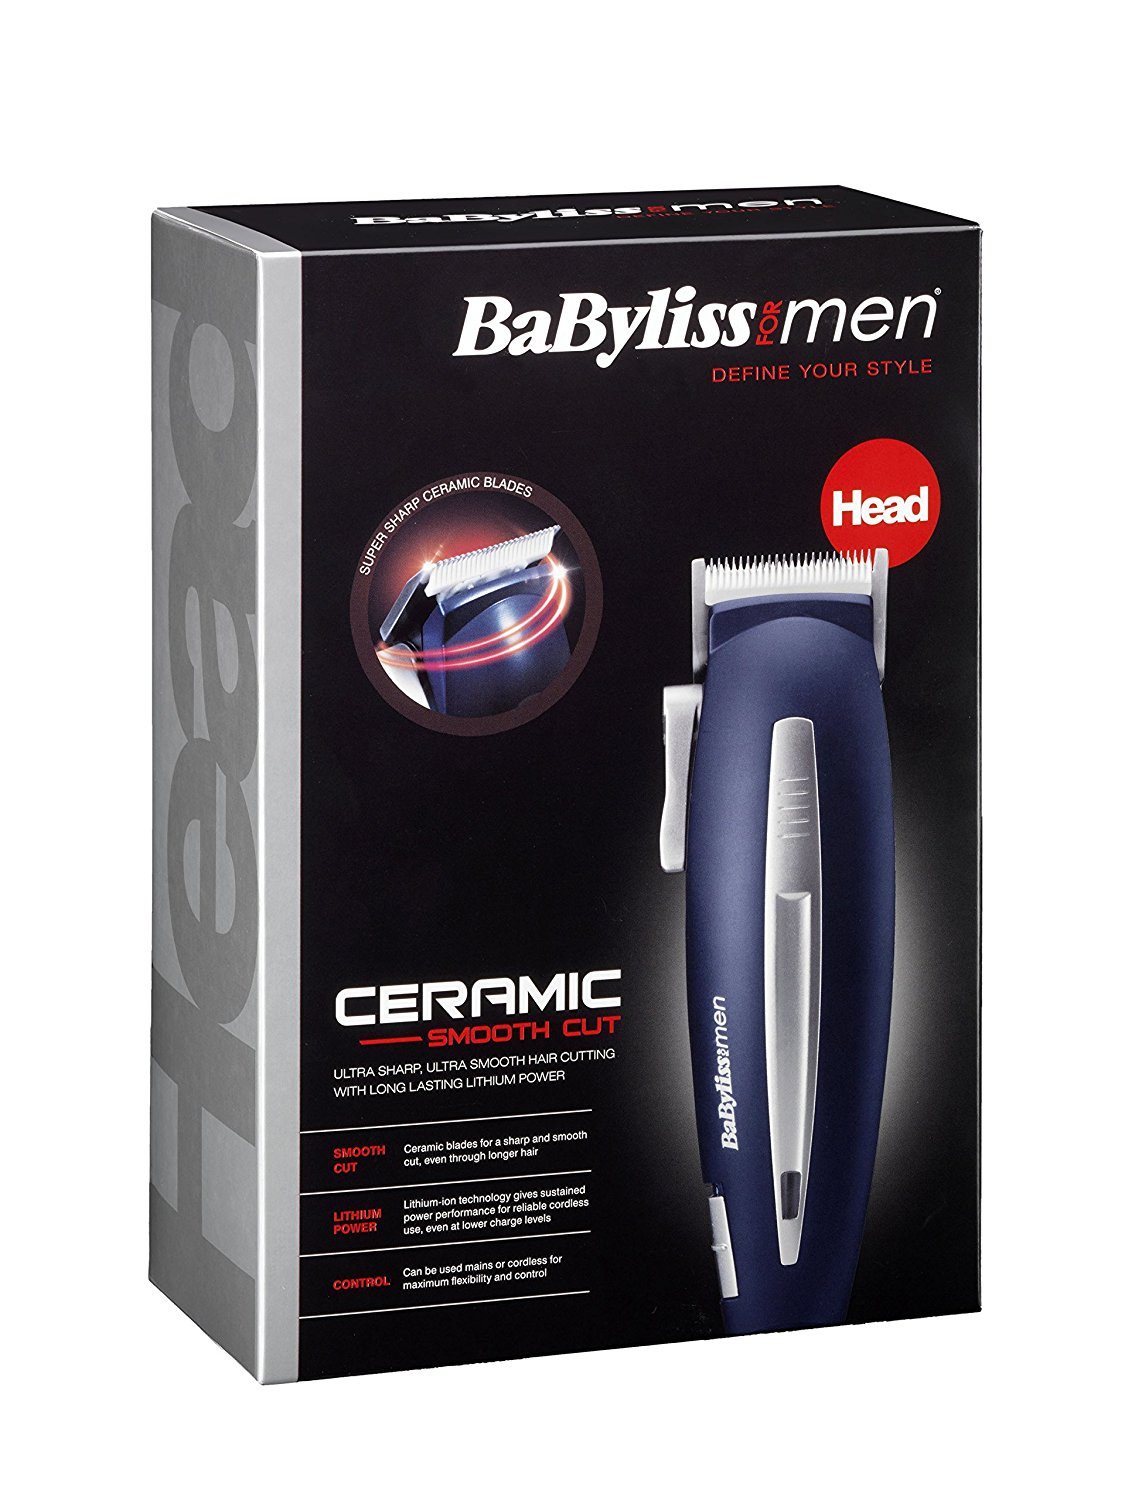 https://haircuttingtools.co.uk/wp-content/uploads/2017/06/Babyliss-for-Men-Ceramic-Smooth-Cut-in-Box.jpg